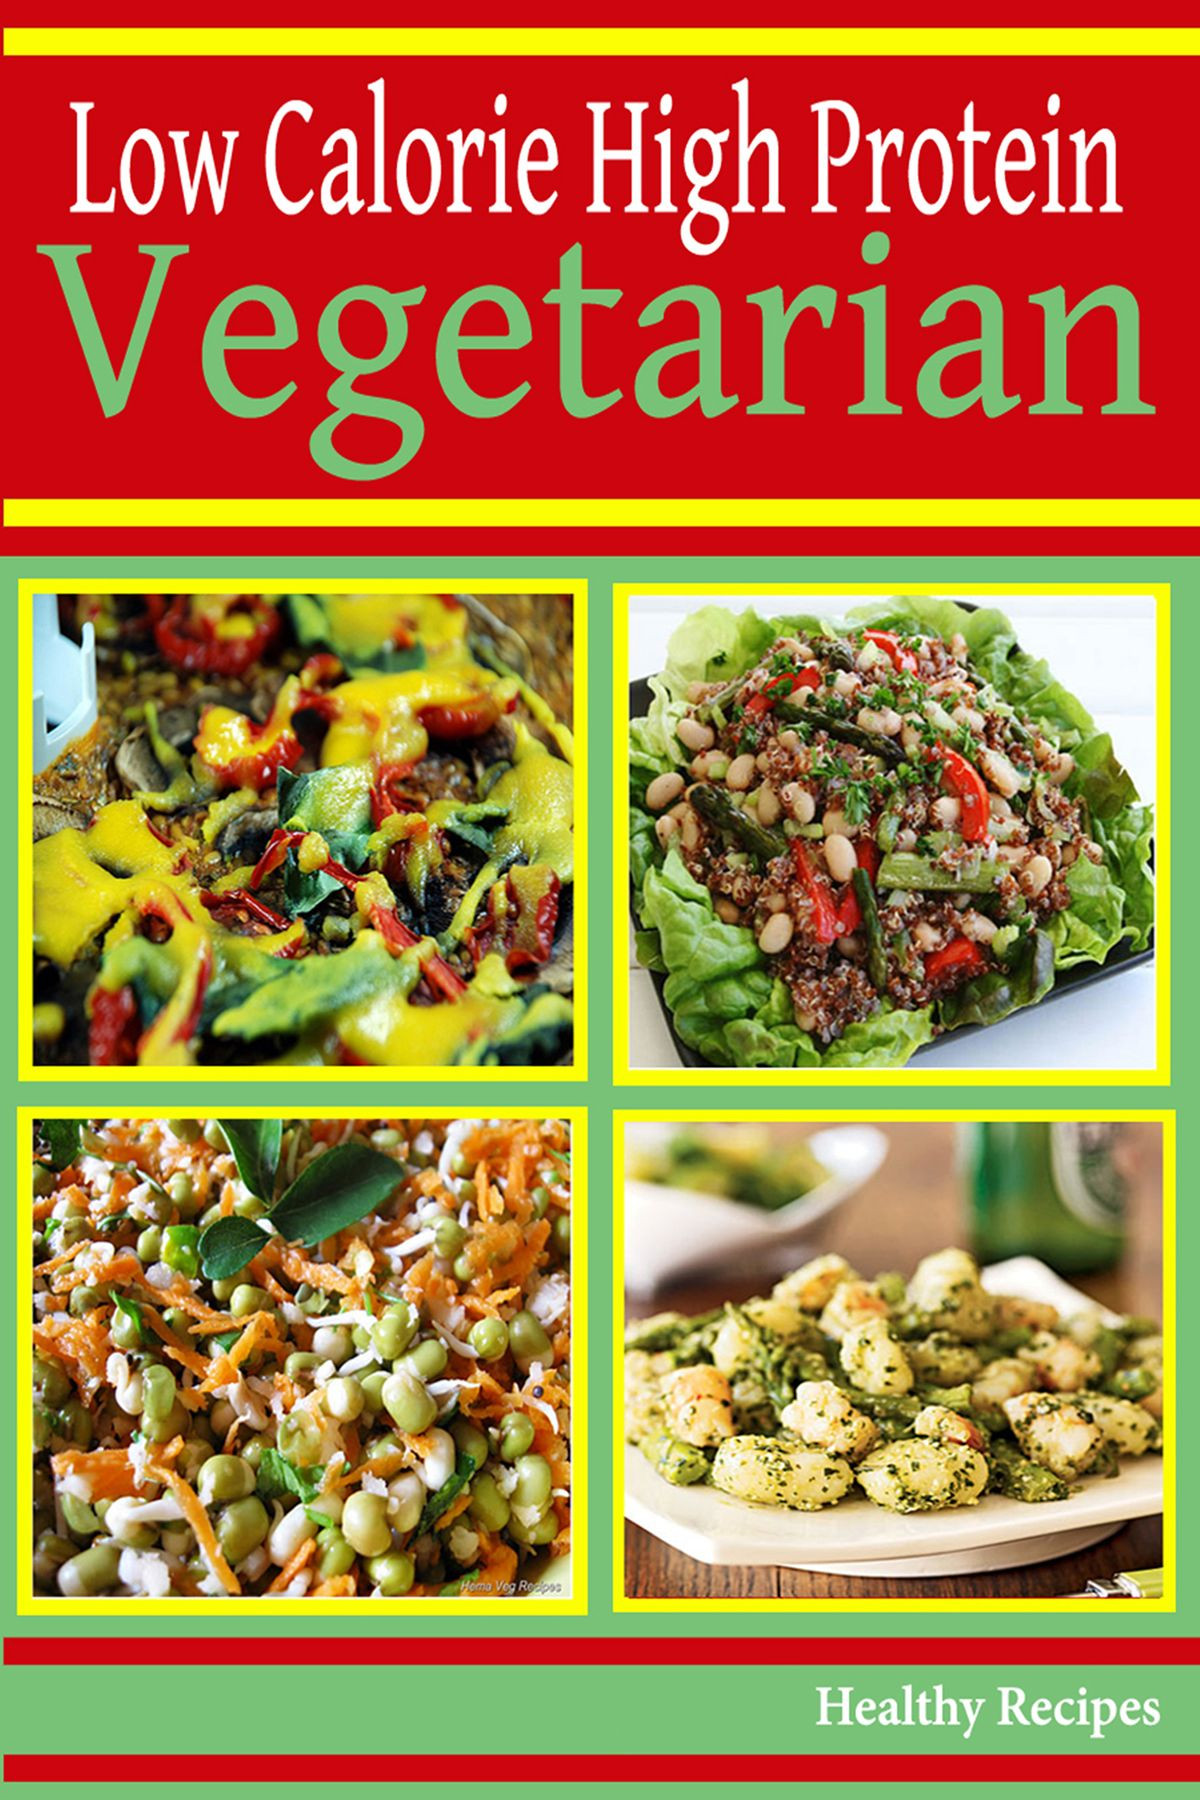 High Protein Foods Vegetarian
 High Protein Low Calorie Ve arian Recipes eBook by